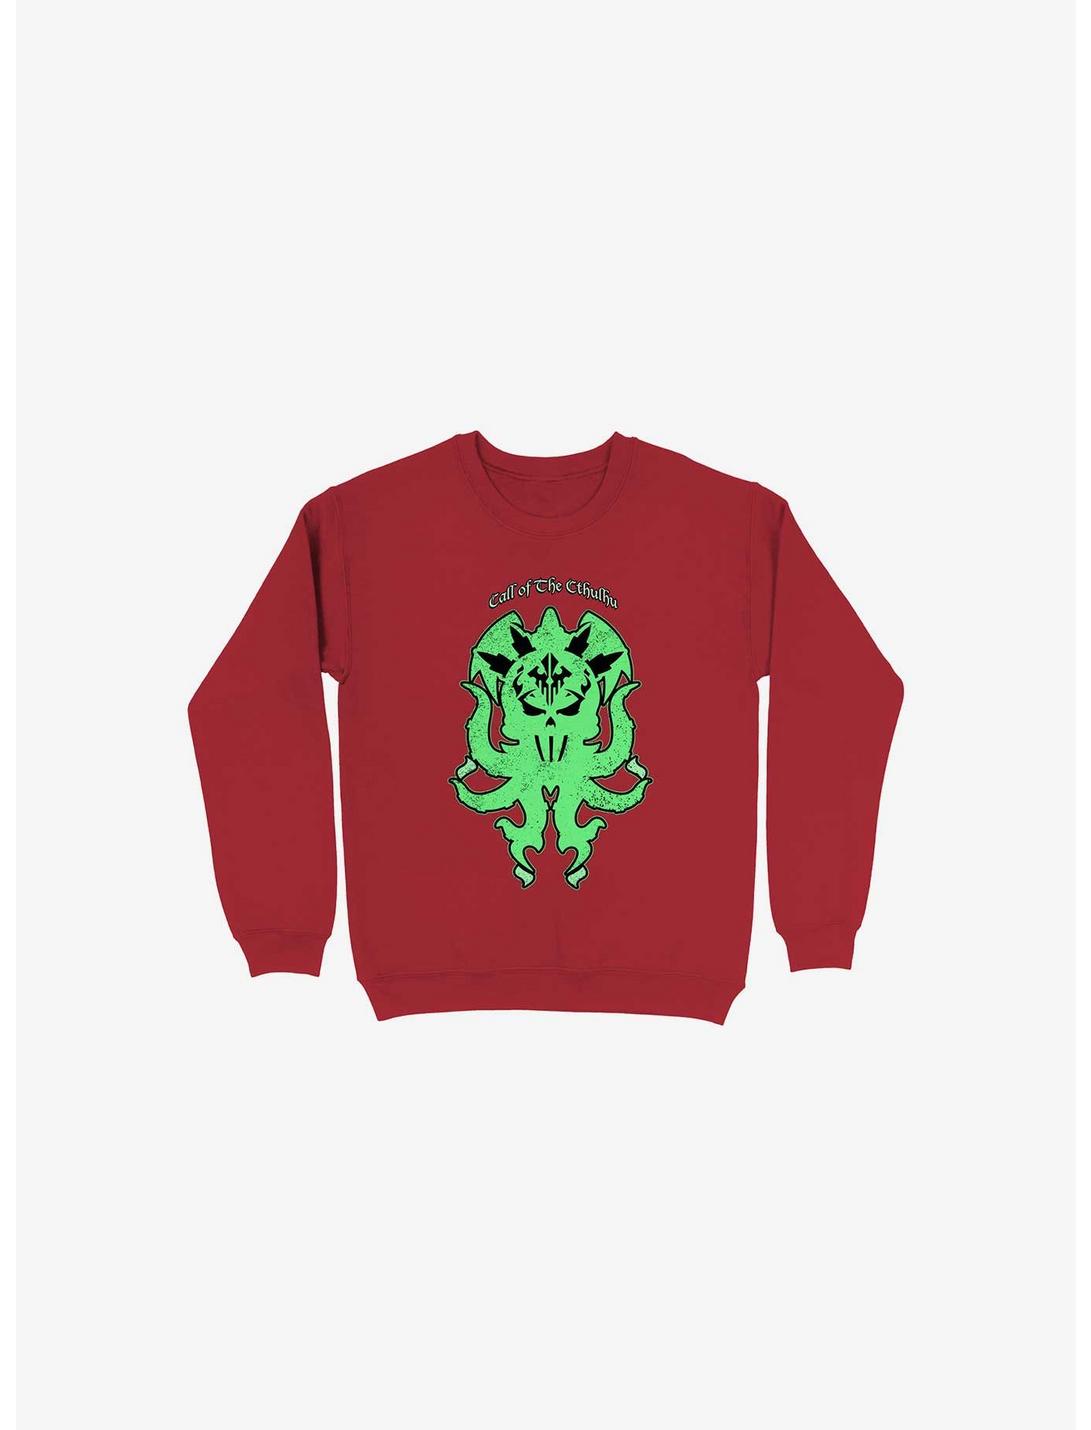 Call Of The Cthulhu Sweatshirt, RED, hi-res